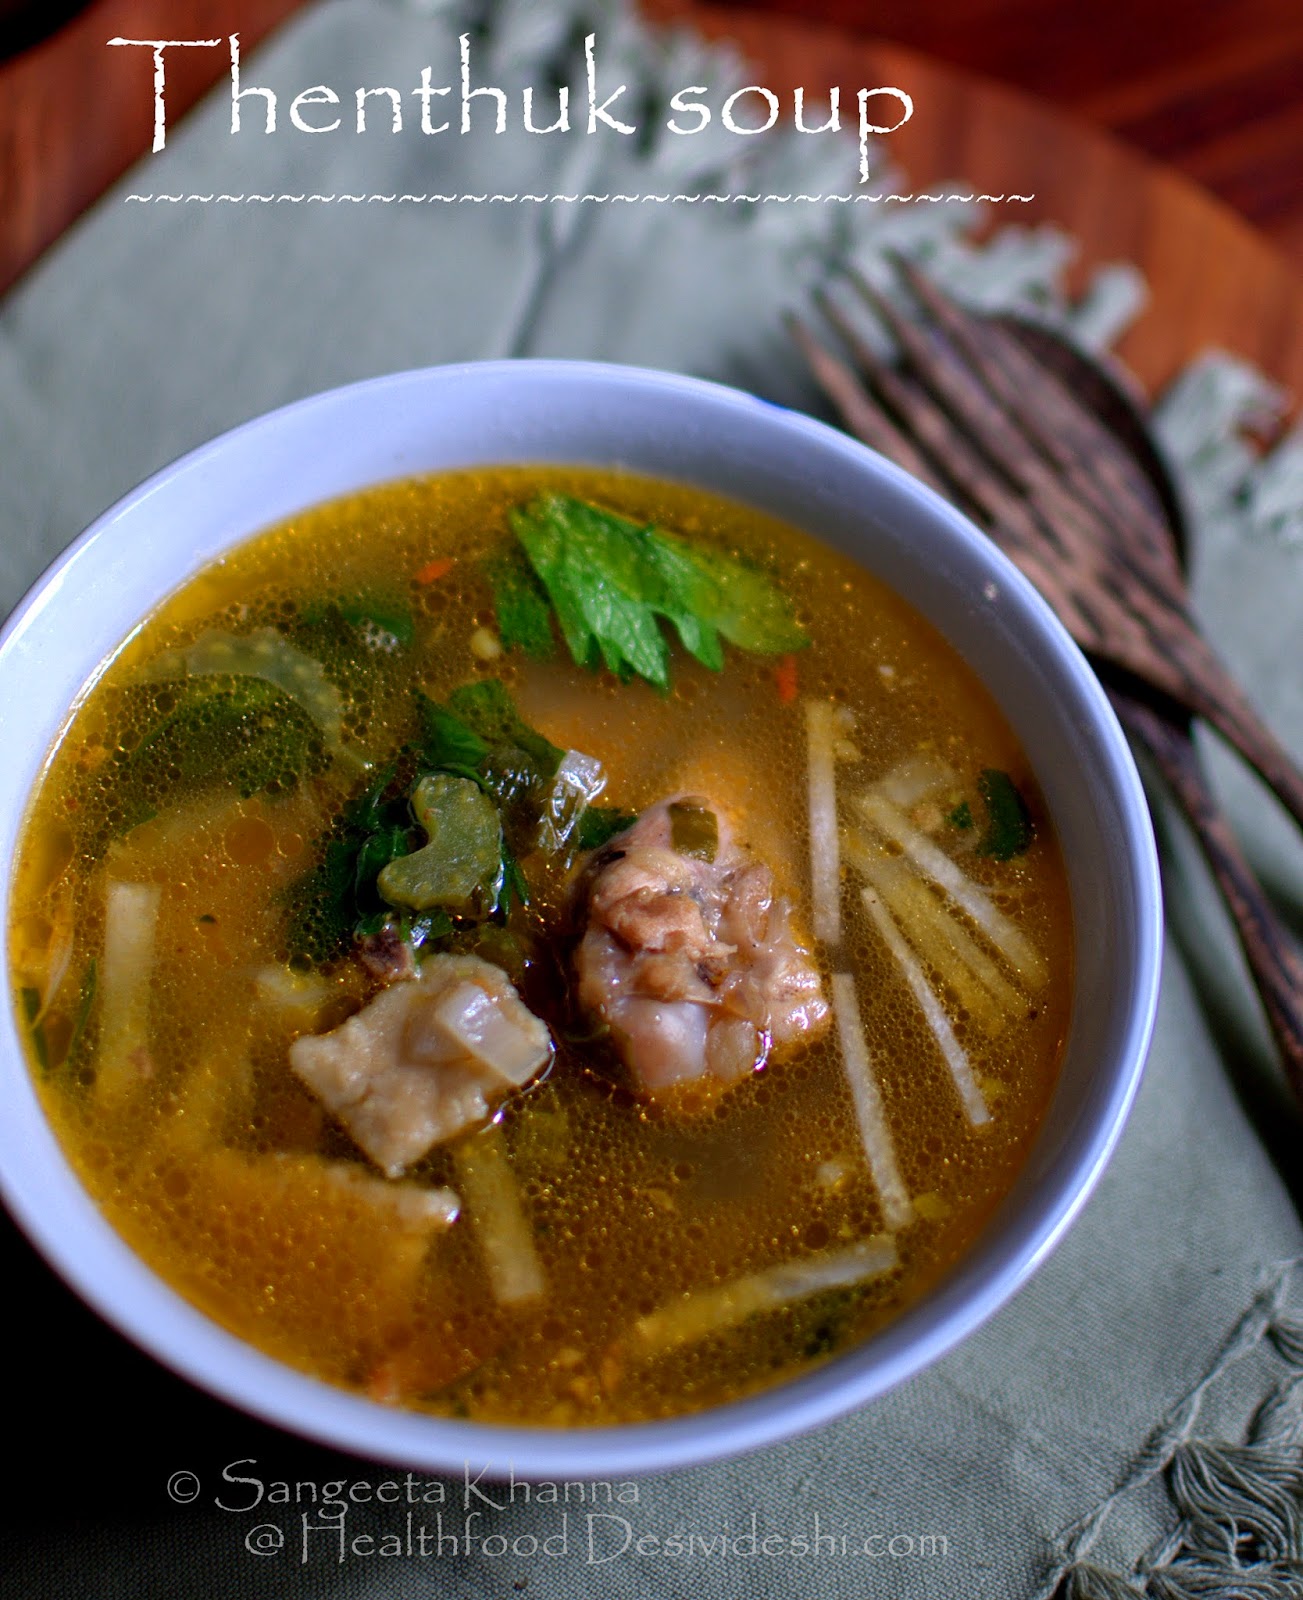 Thenthuk soup | a Tibetan soup with pulled noodles, chicken and vegetables